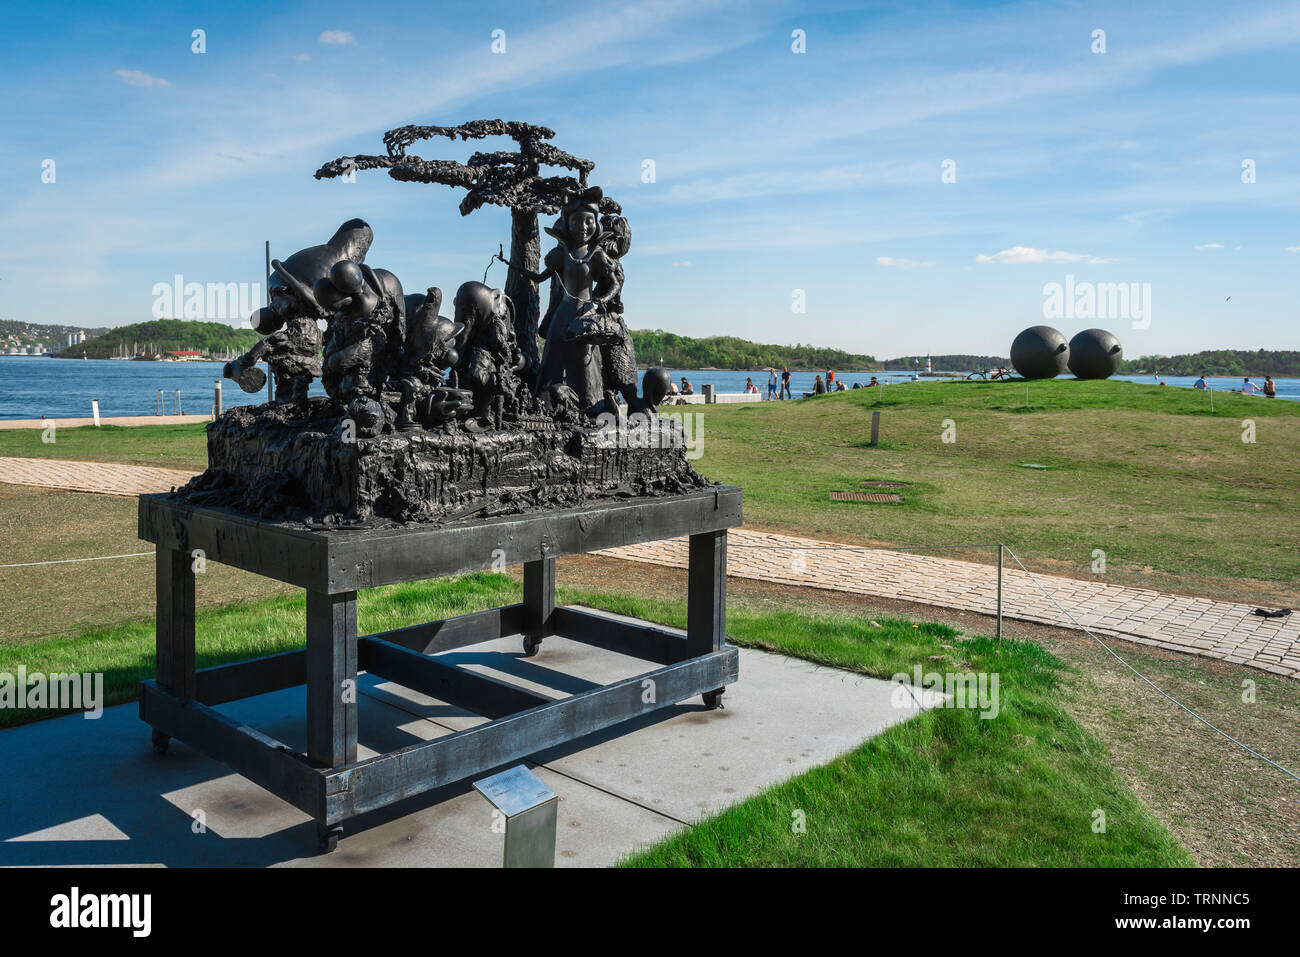 Tjuvholmen Sculpture Park, view of sculptures by Paul McCarthy (front) and Louse Bourgeois in the Sculpture Park in Oslo beach, Norway. Stock Photo